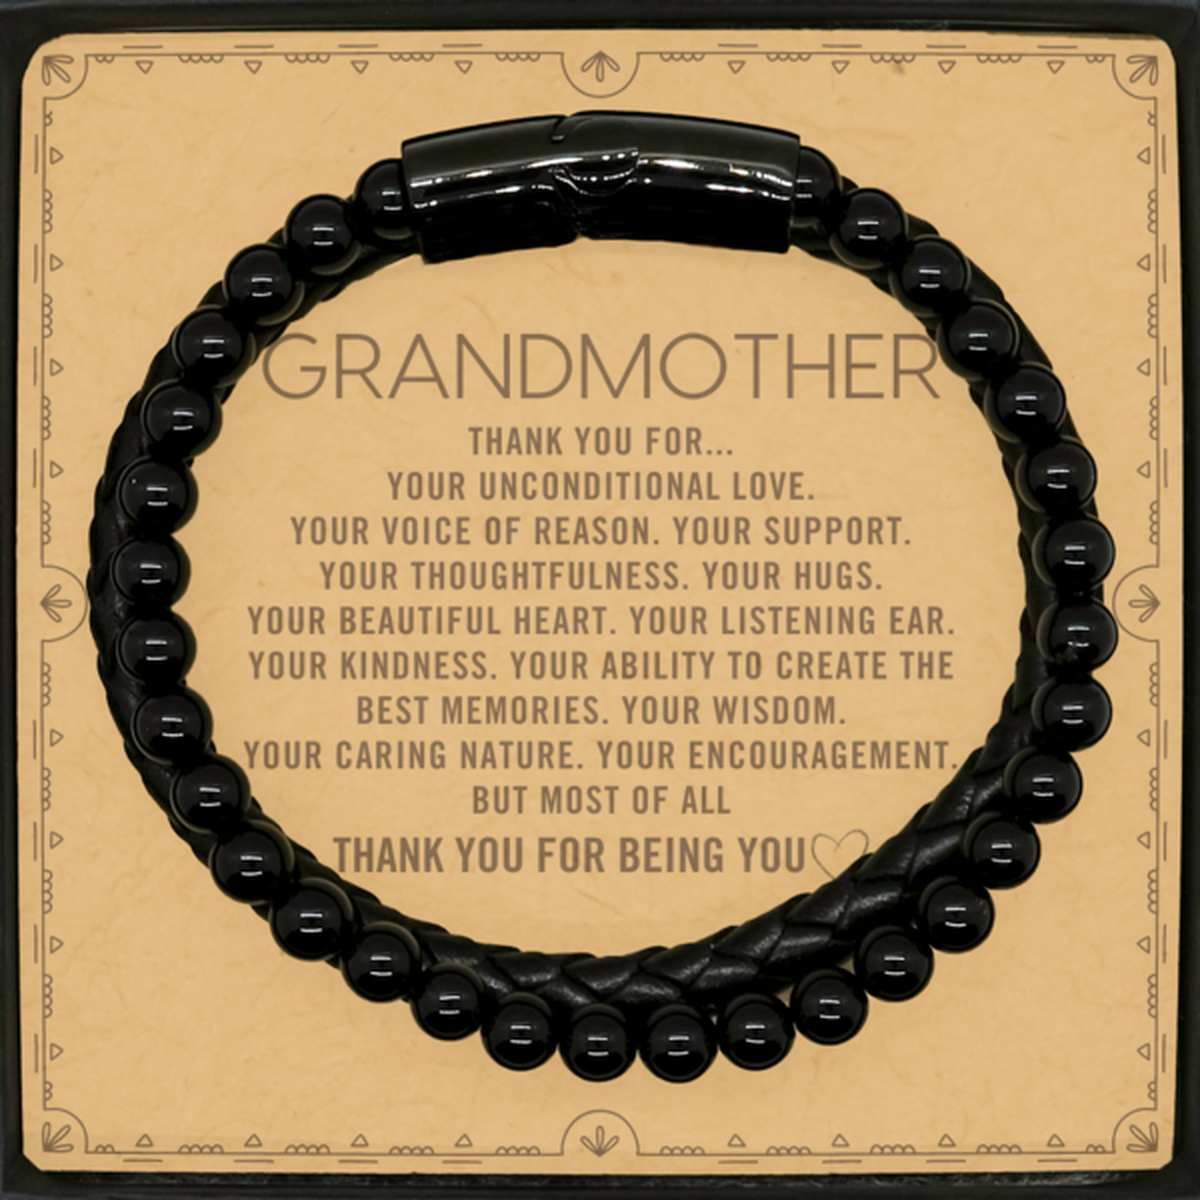 Grandmother Stone Leather Bracelets Custom, Message Card Gifts For Grandmother Christmas Graduation Birthday Gifts for Men Women Grandmother Thank you for Your unconditional love